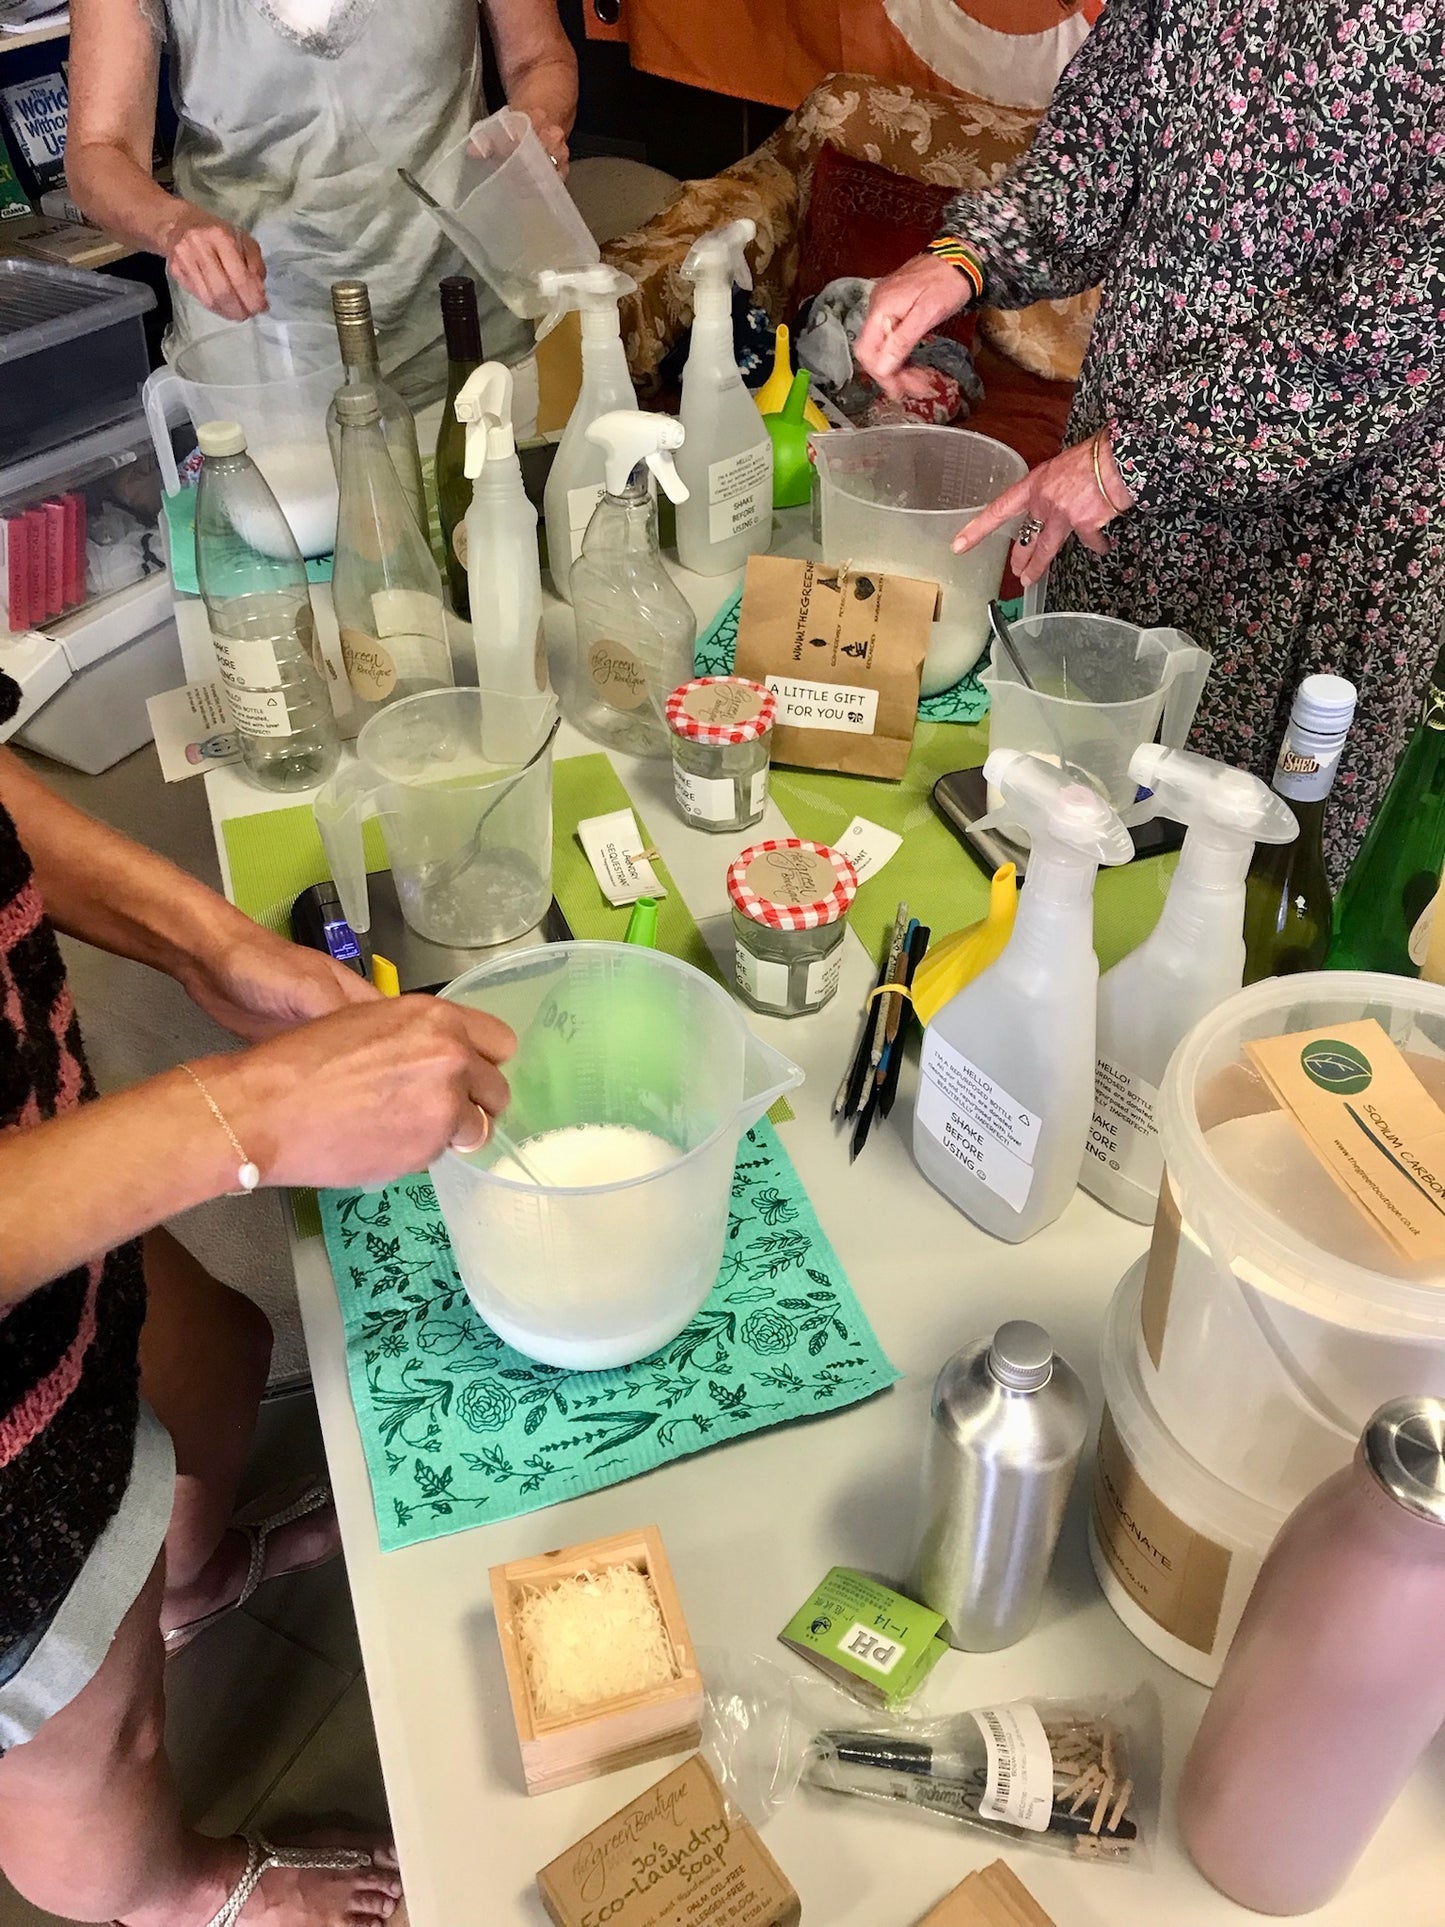 MAKE YOUR OWN NATURAL, ZERO-WASTE CLEANING PRODUCTS: WORTHING WORKSHOP